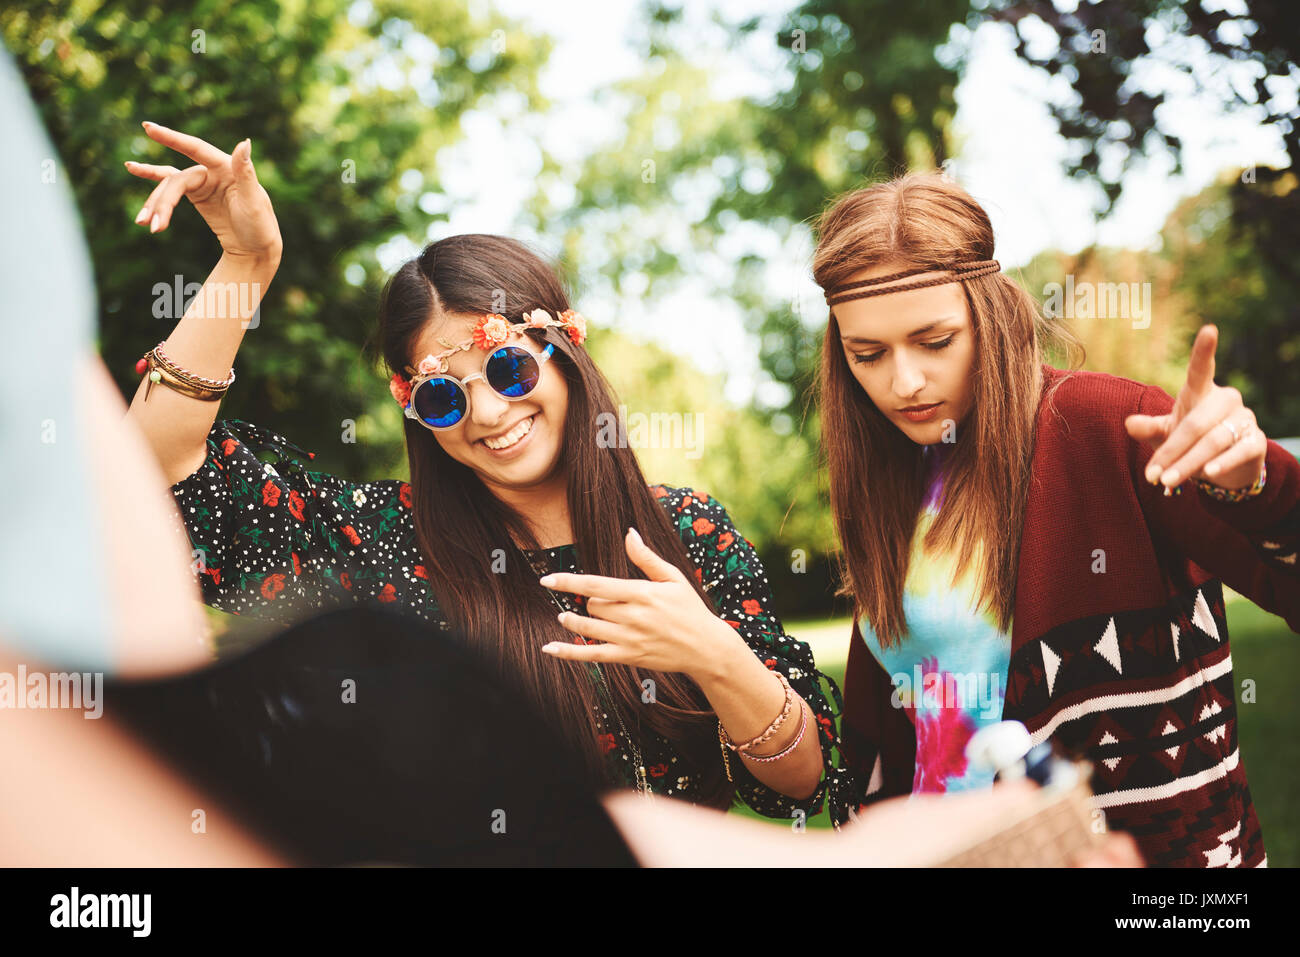 Two young boho women dancing together at festival Stock Photo